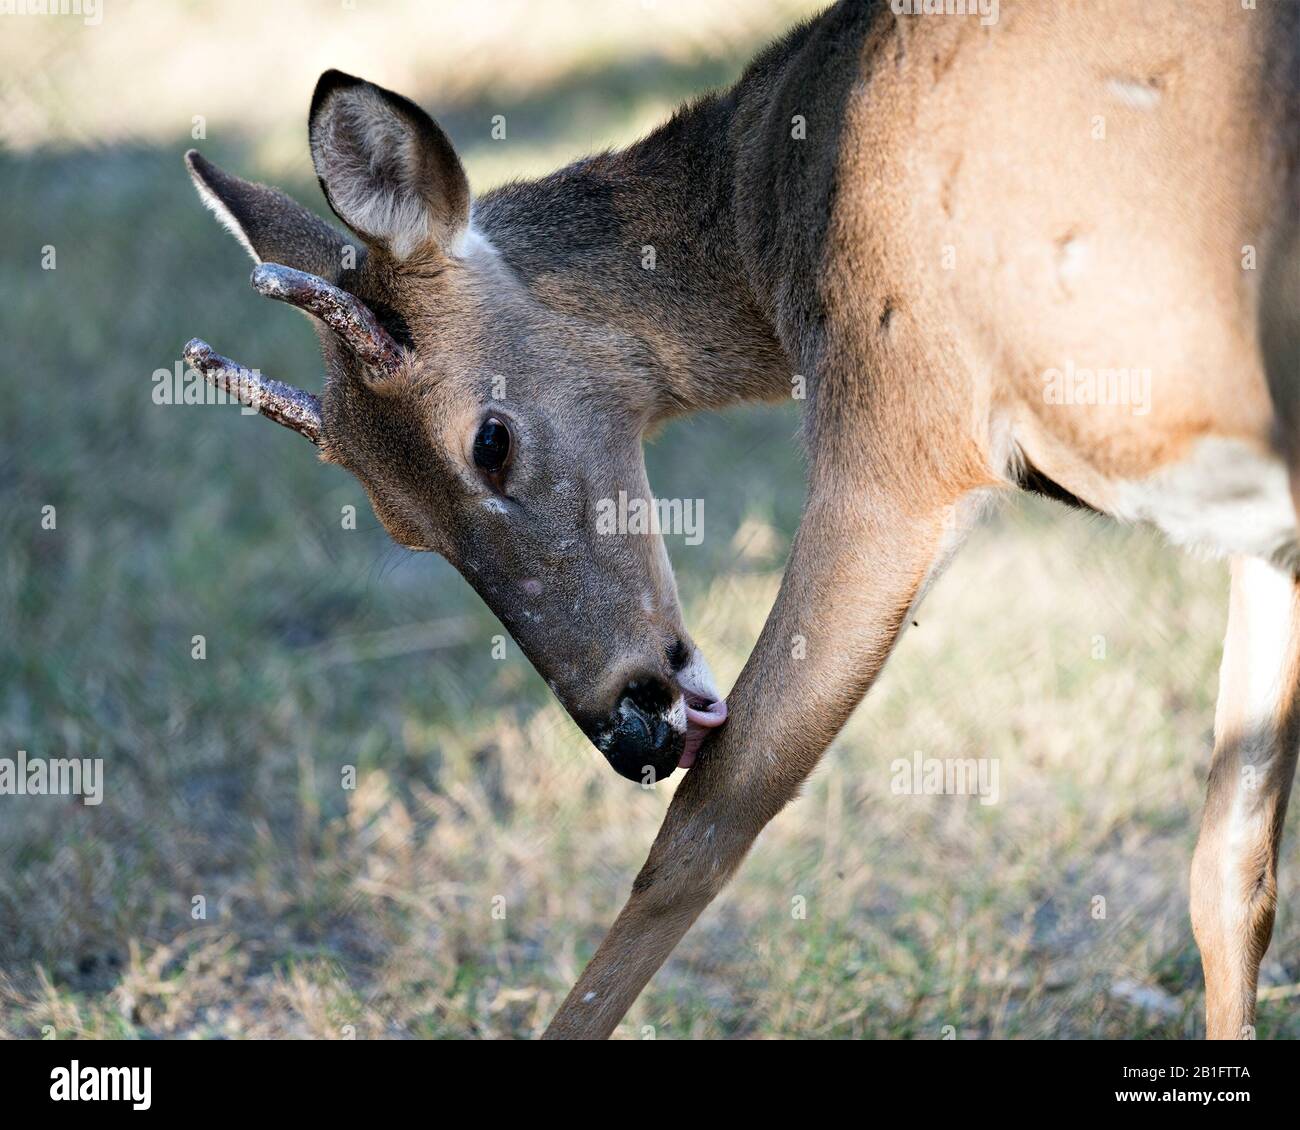 Deer animal close-up profile view licking its leg in its environment and surrounding. Stock Photo